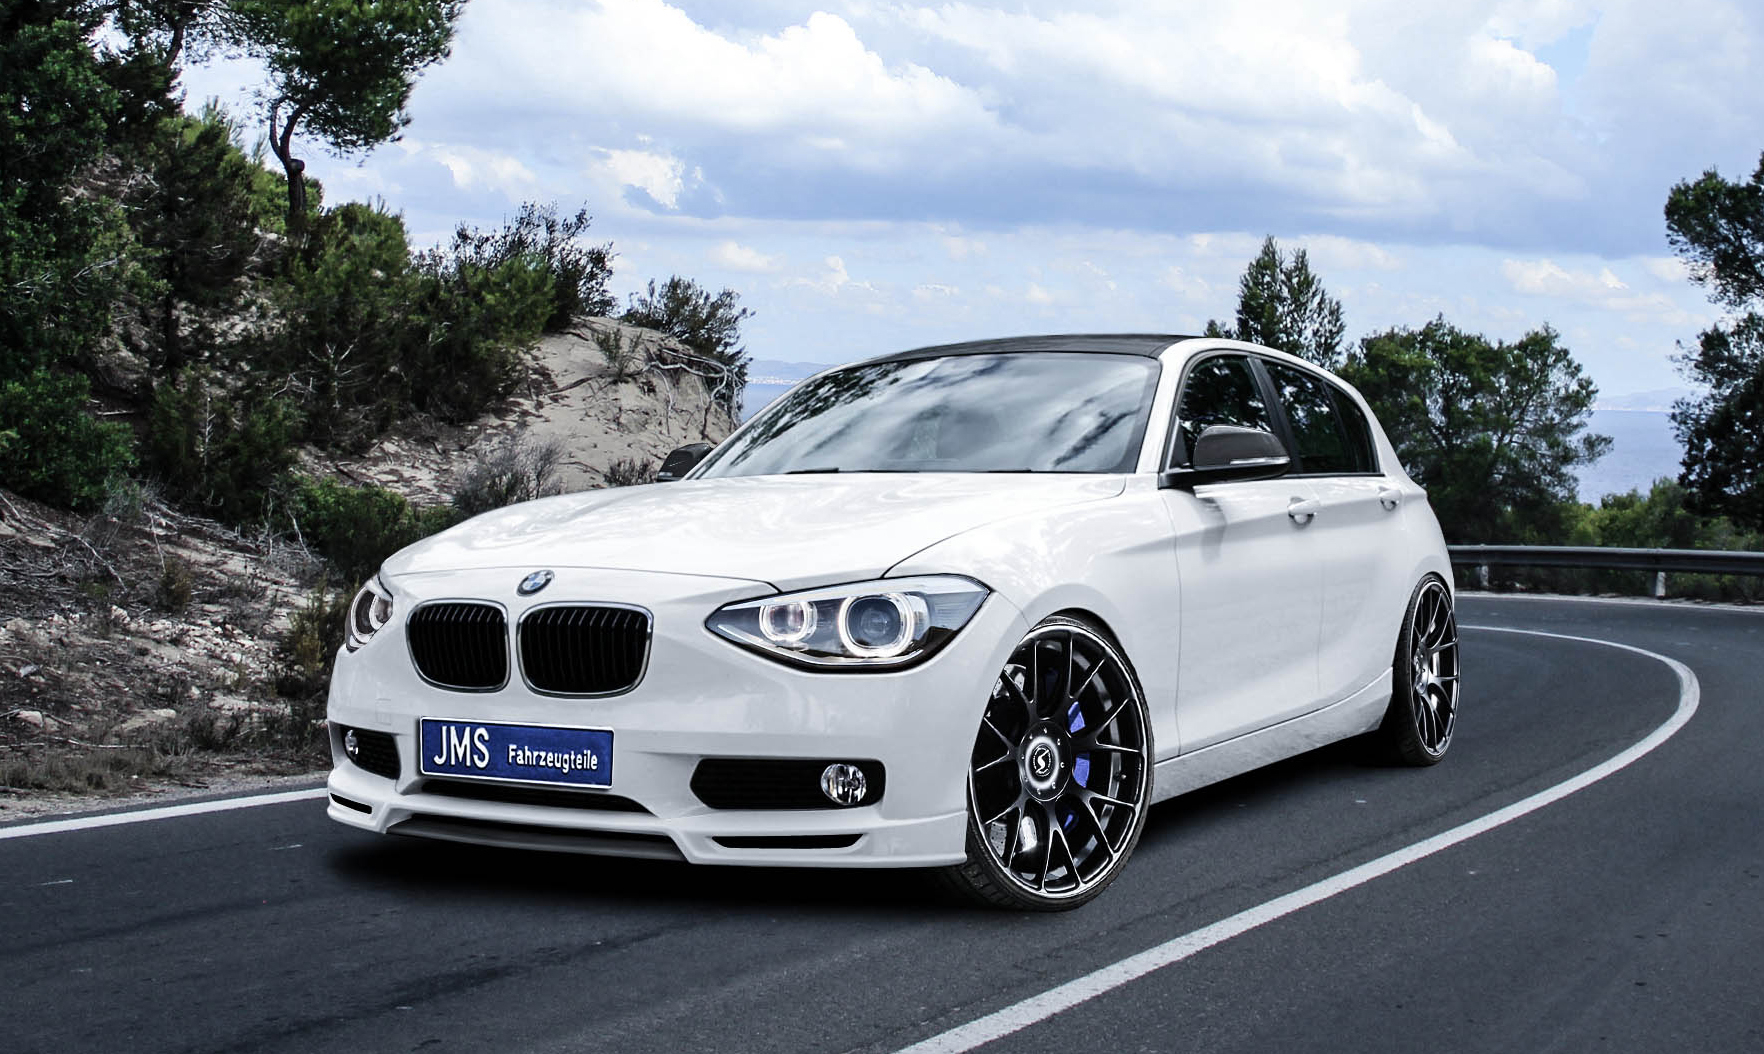 new styling for bmw f20/21 1series from jms, JMS